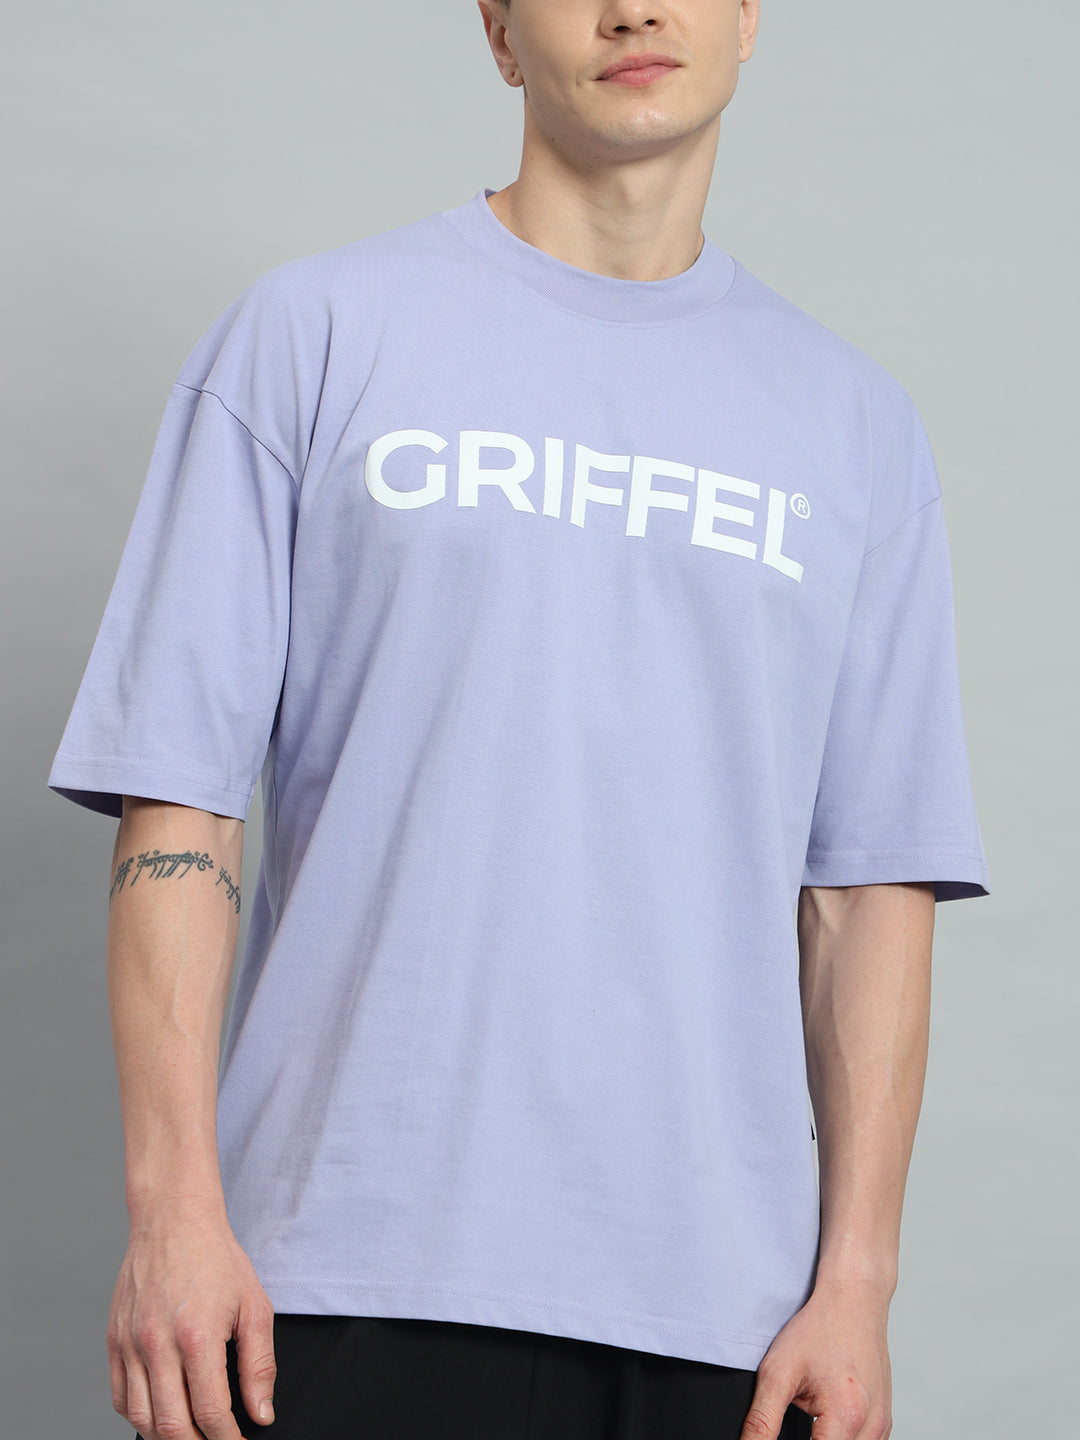 GRIFFEL logo T-shirt and Trackpant Set